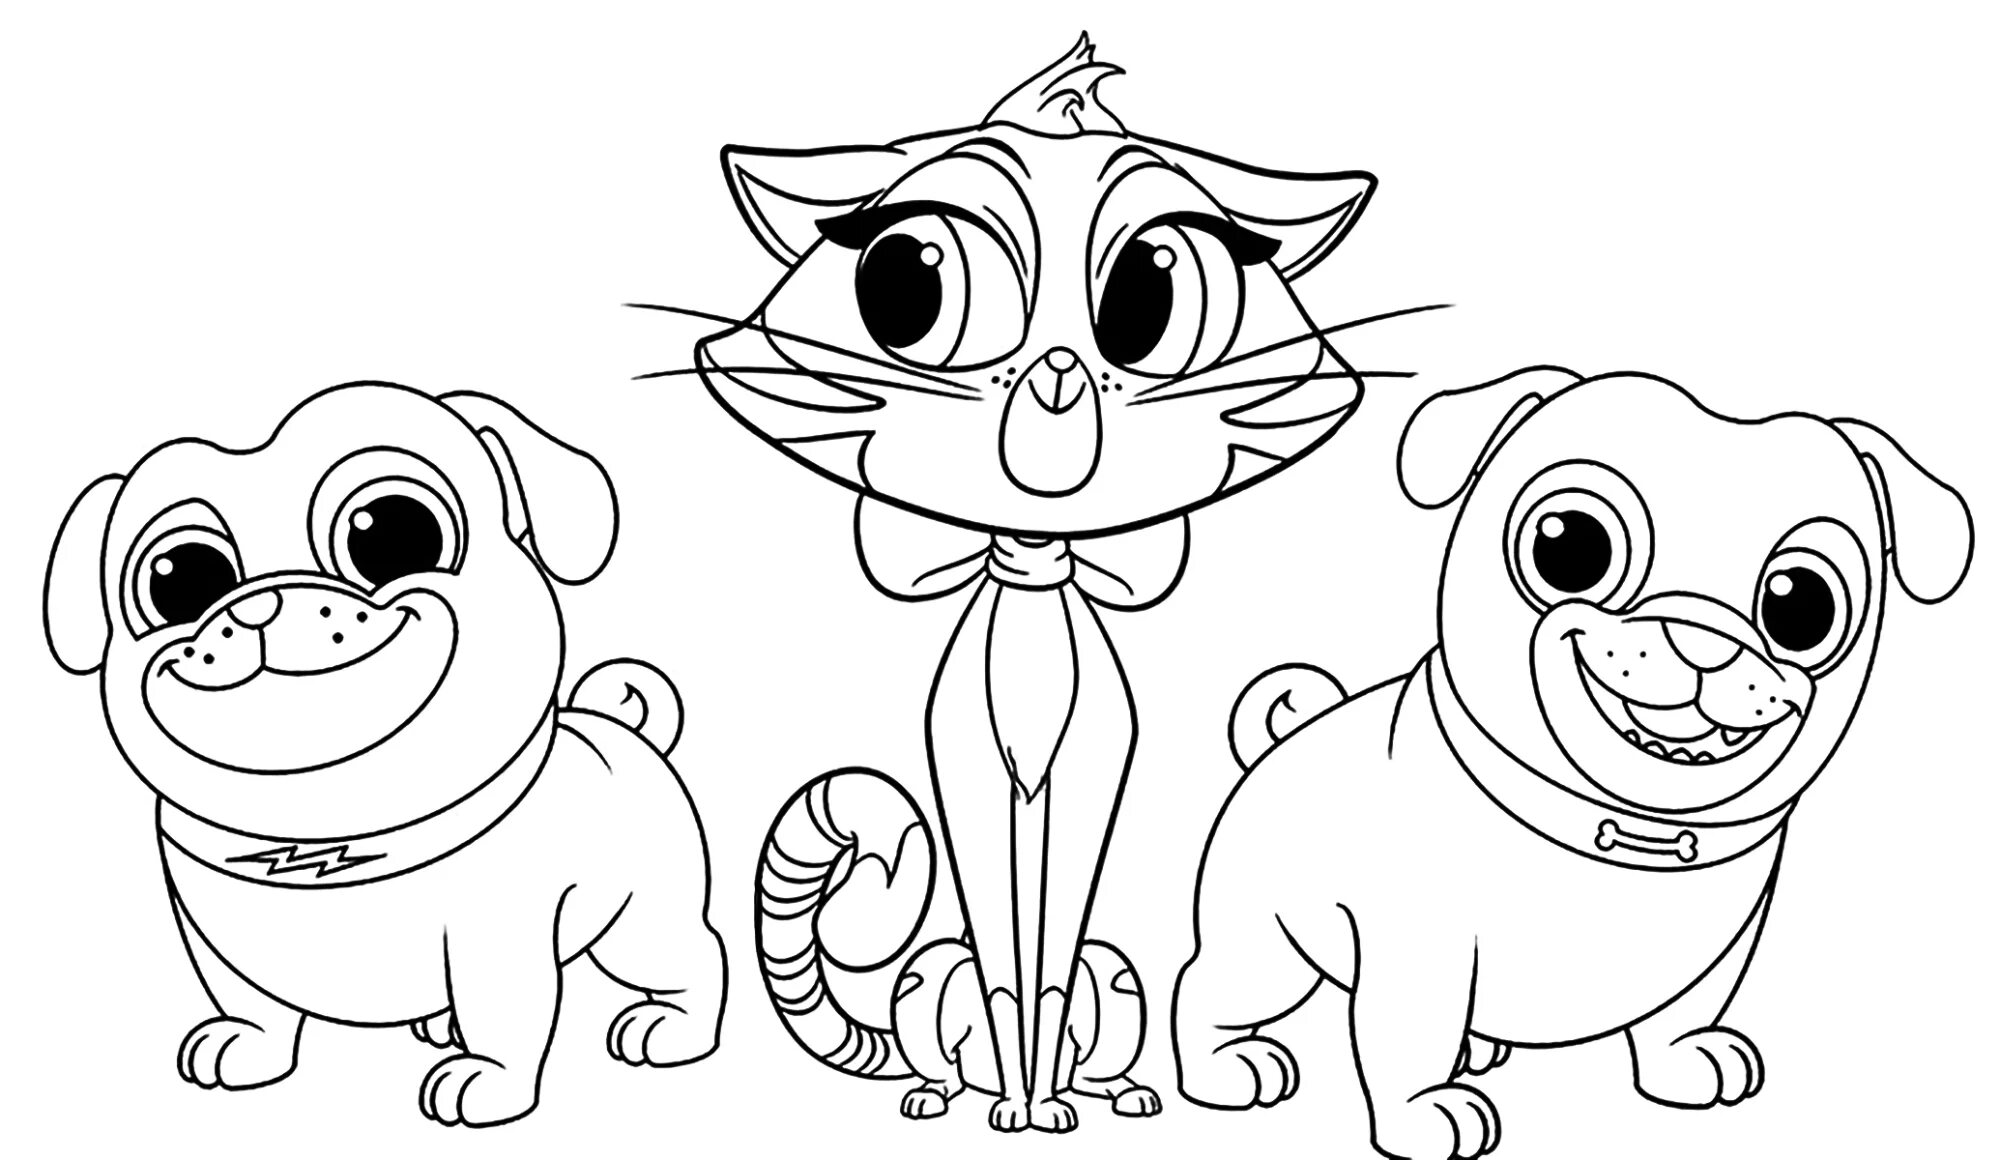 Cats dogs for kids cartoon series #14